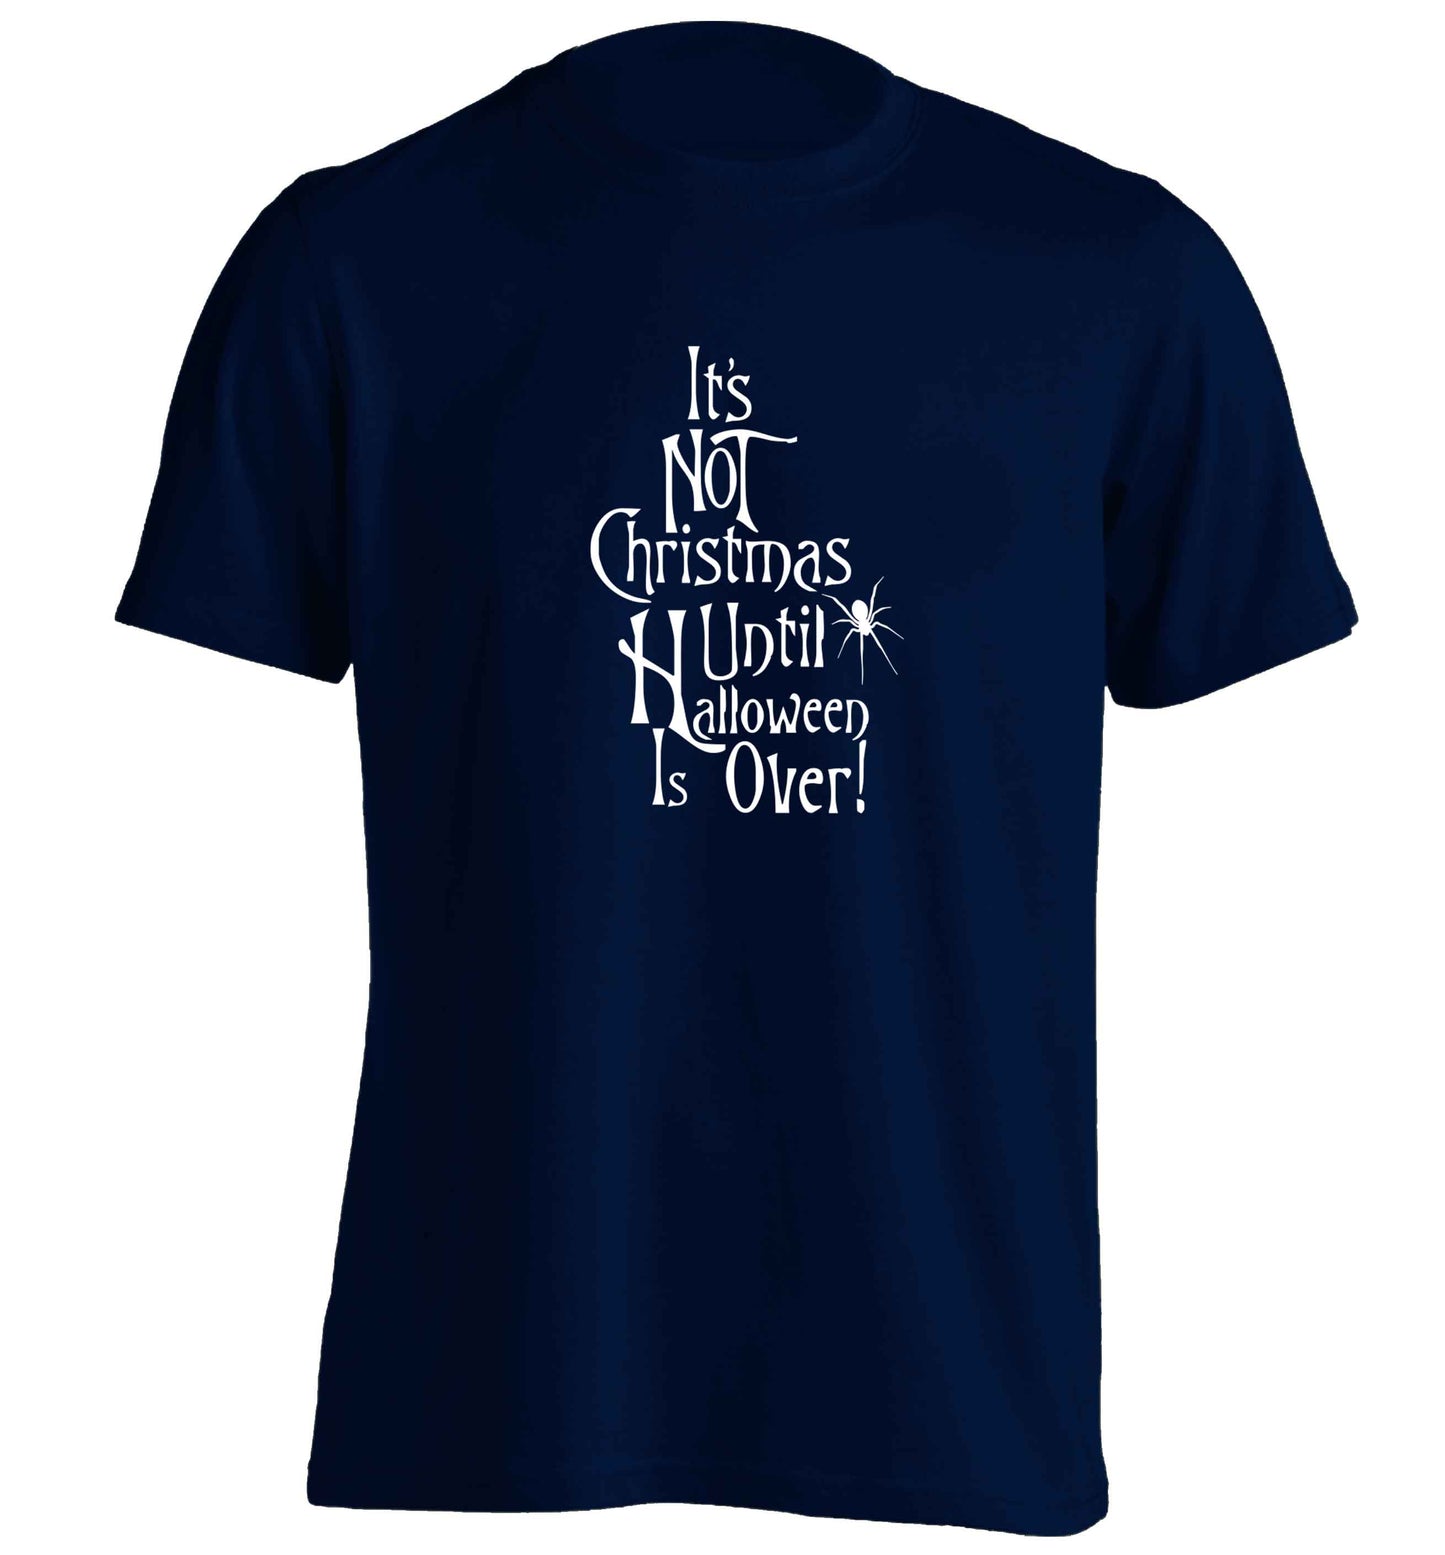 It's not Christmas until Halloween is over adults unisex navy Tshirt 2XL